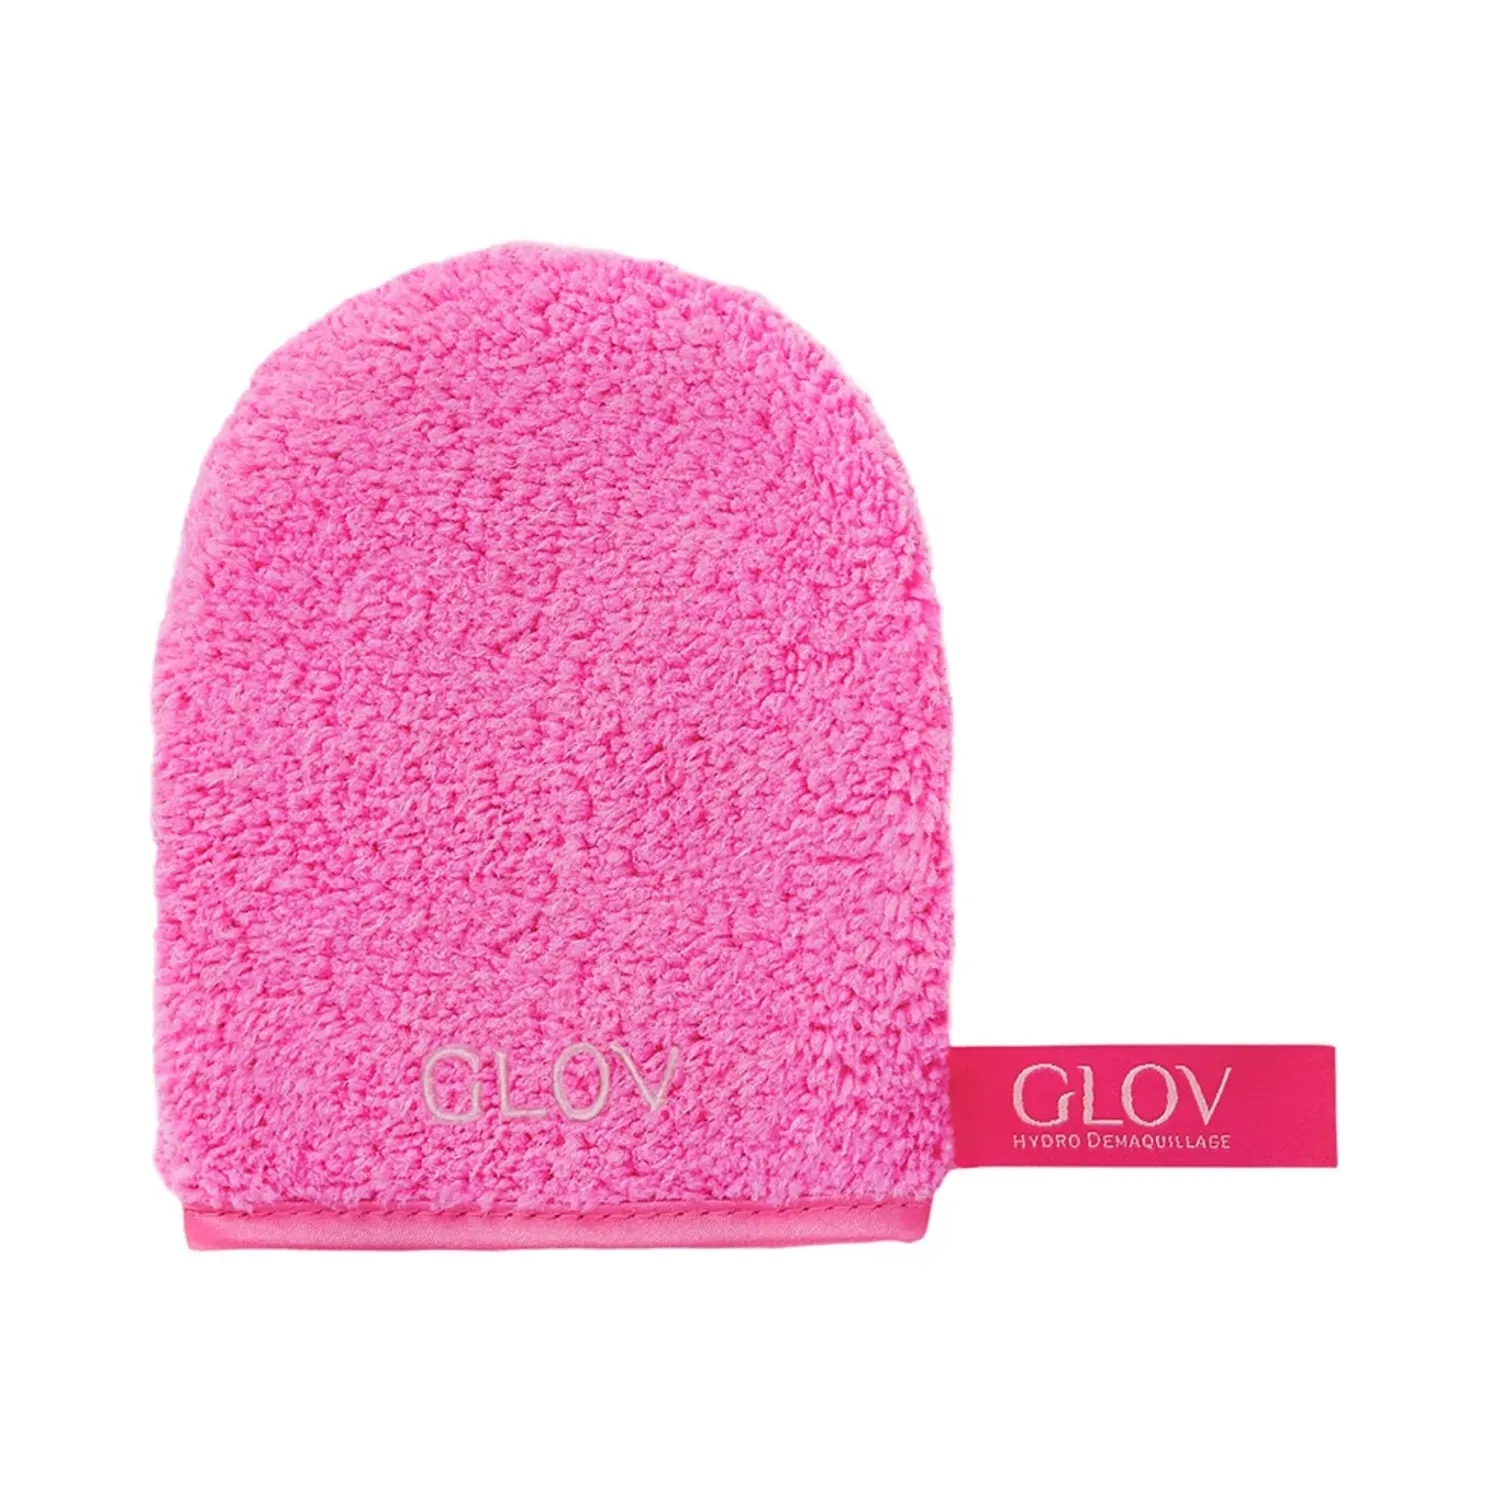 Glov | Glov On The Go Makeup Remover Glove - Party Pink (25 g)